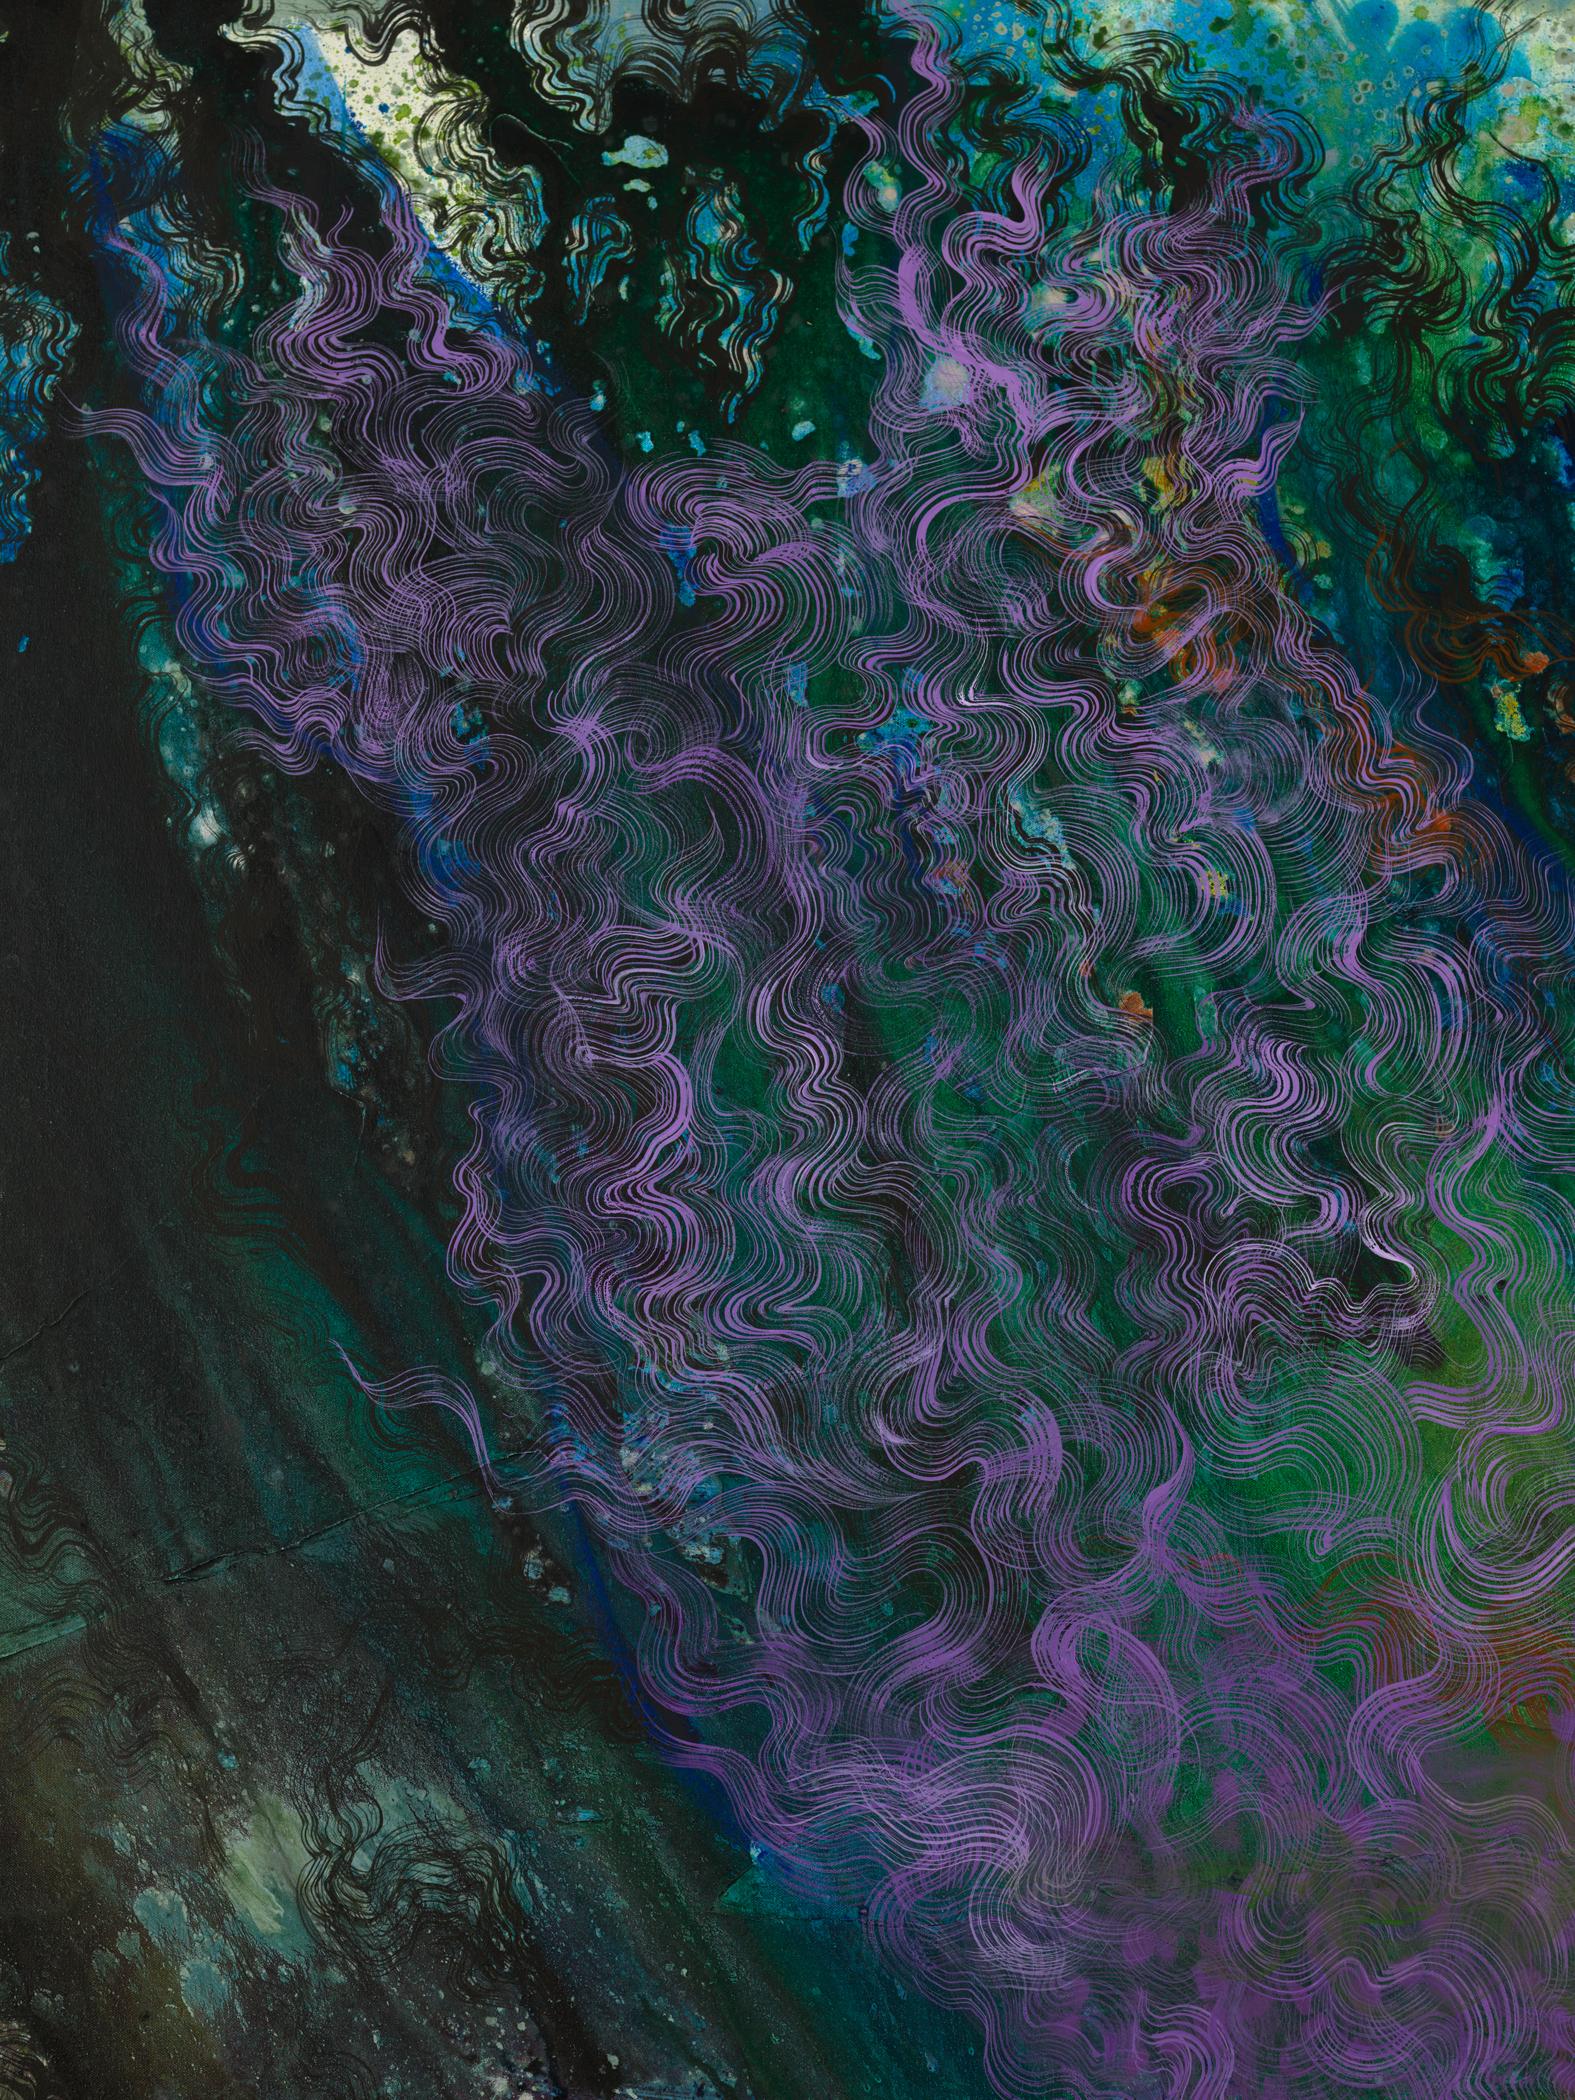 detail of painting; deep aquatic blues and vibrant purples swirl together